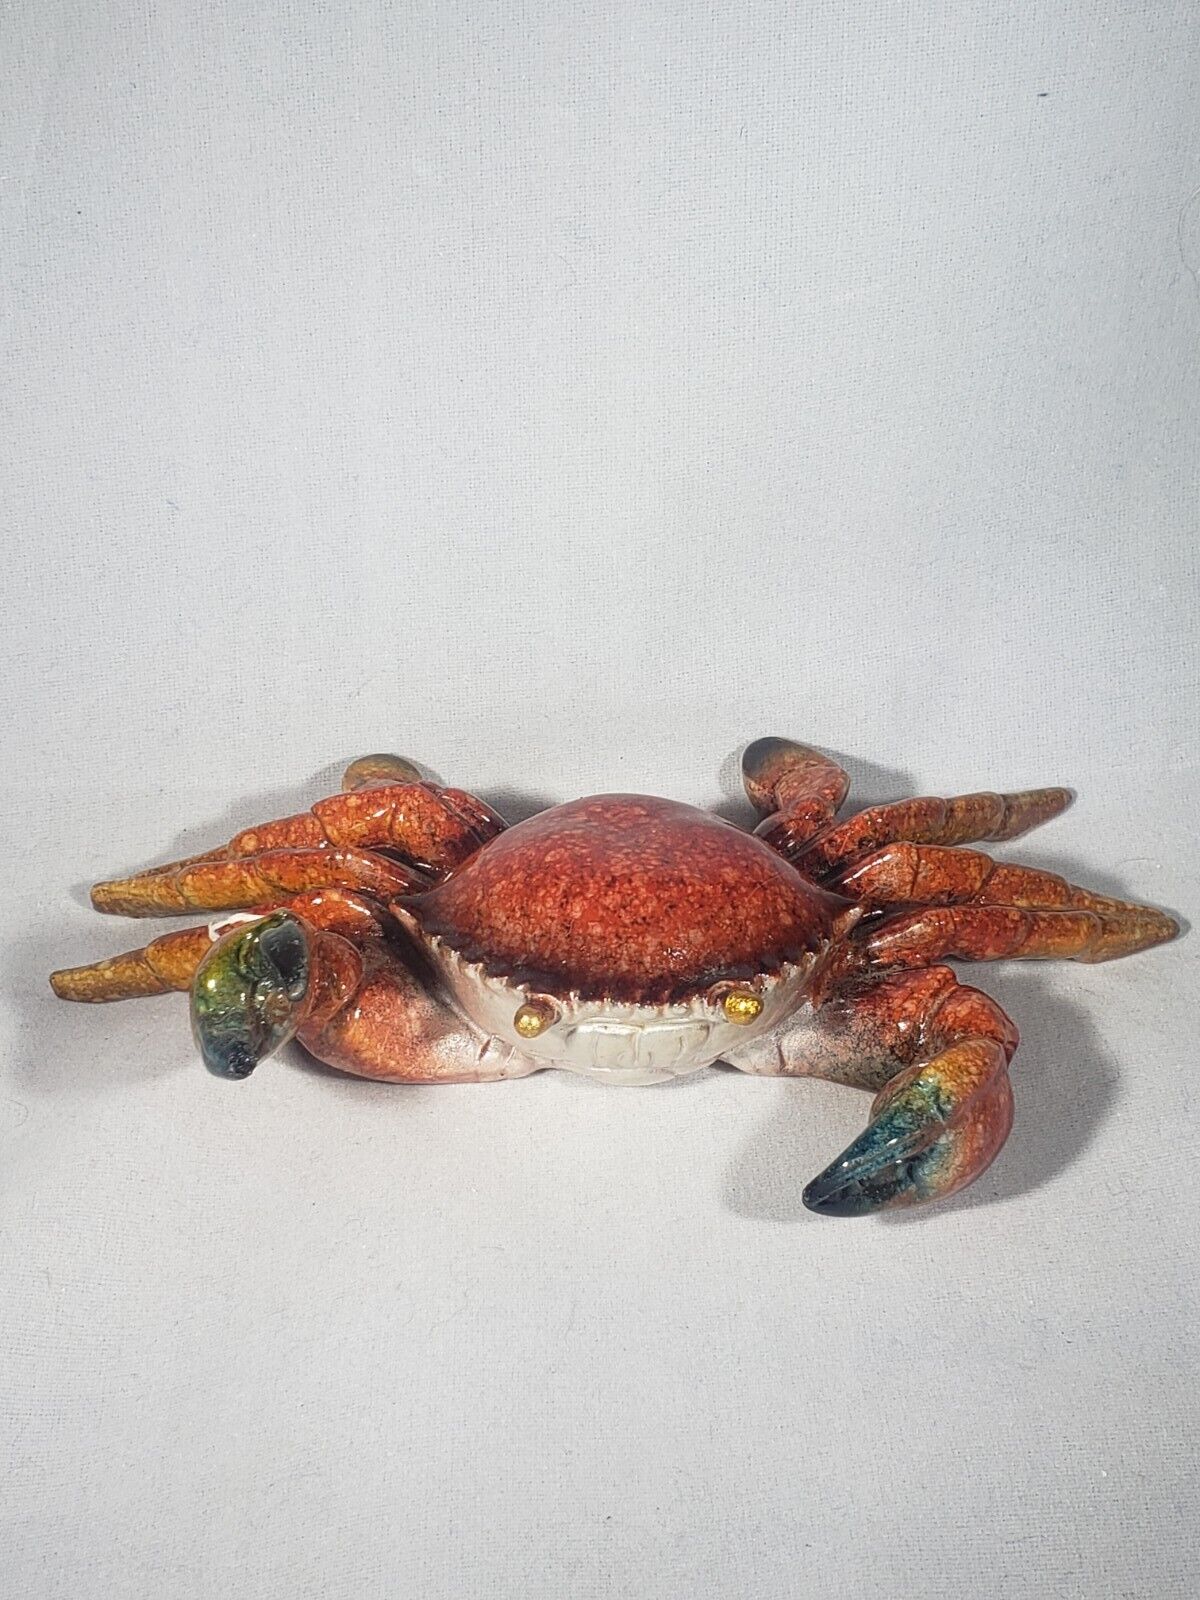 little red crab ocean theme statue or figurine